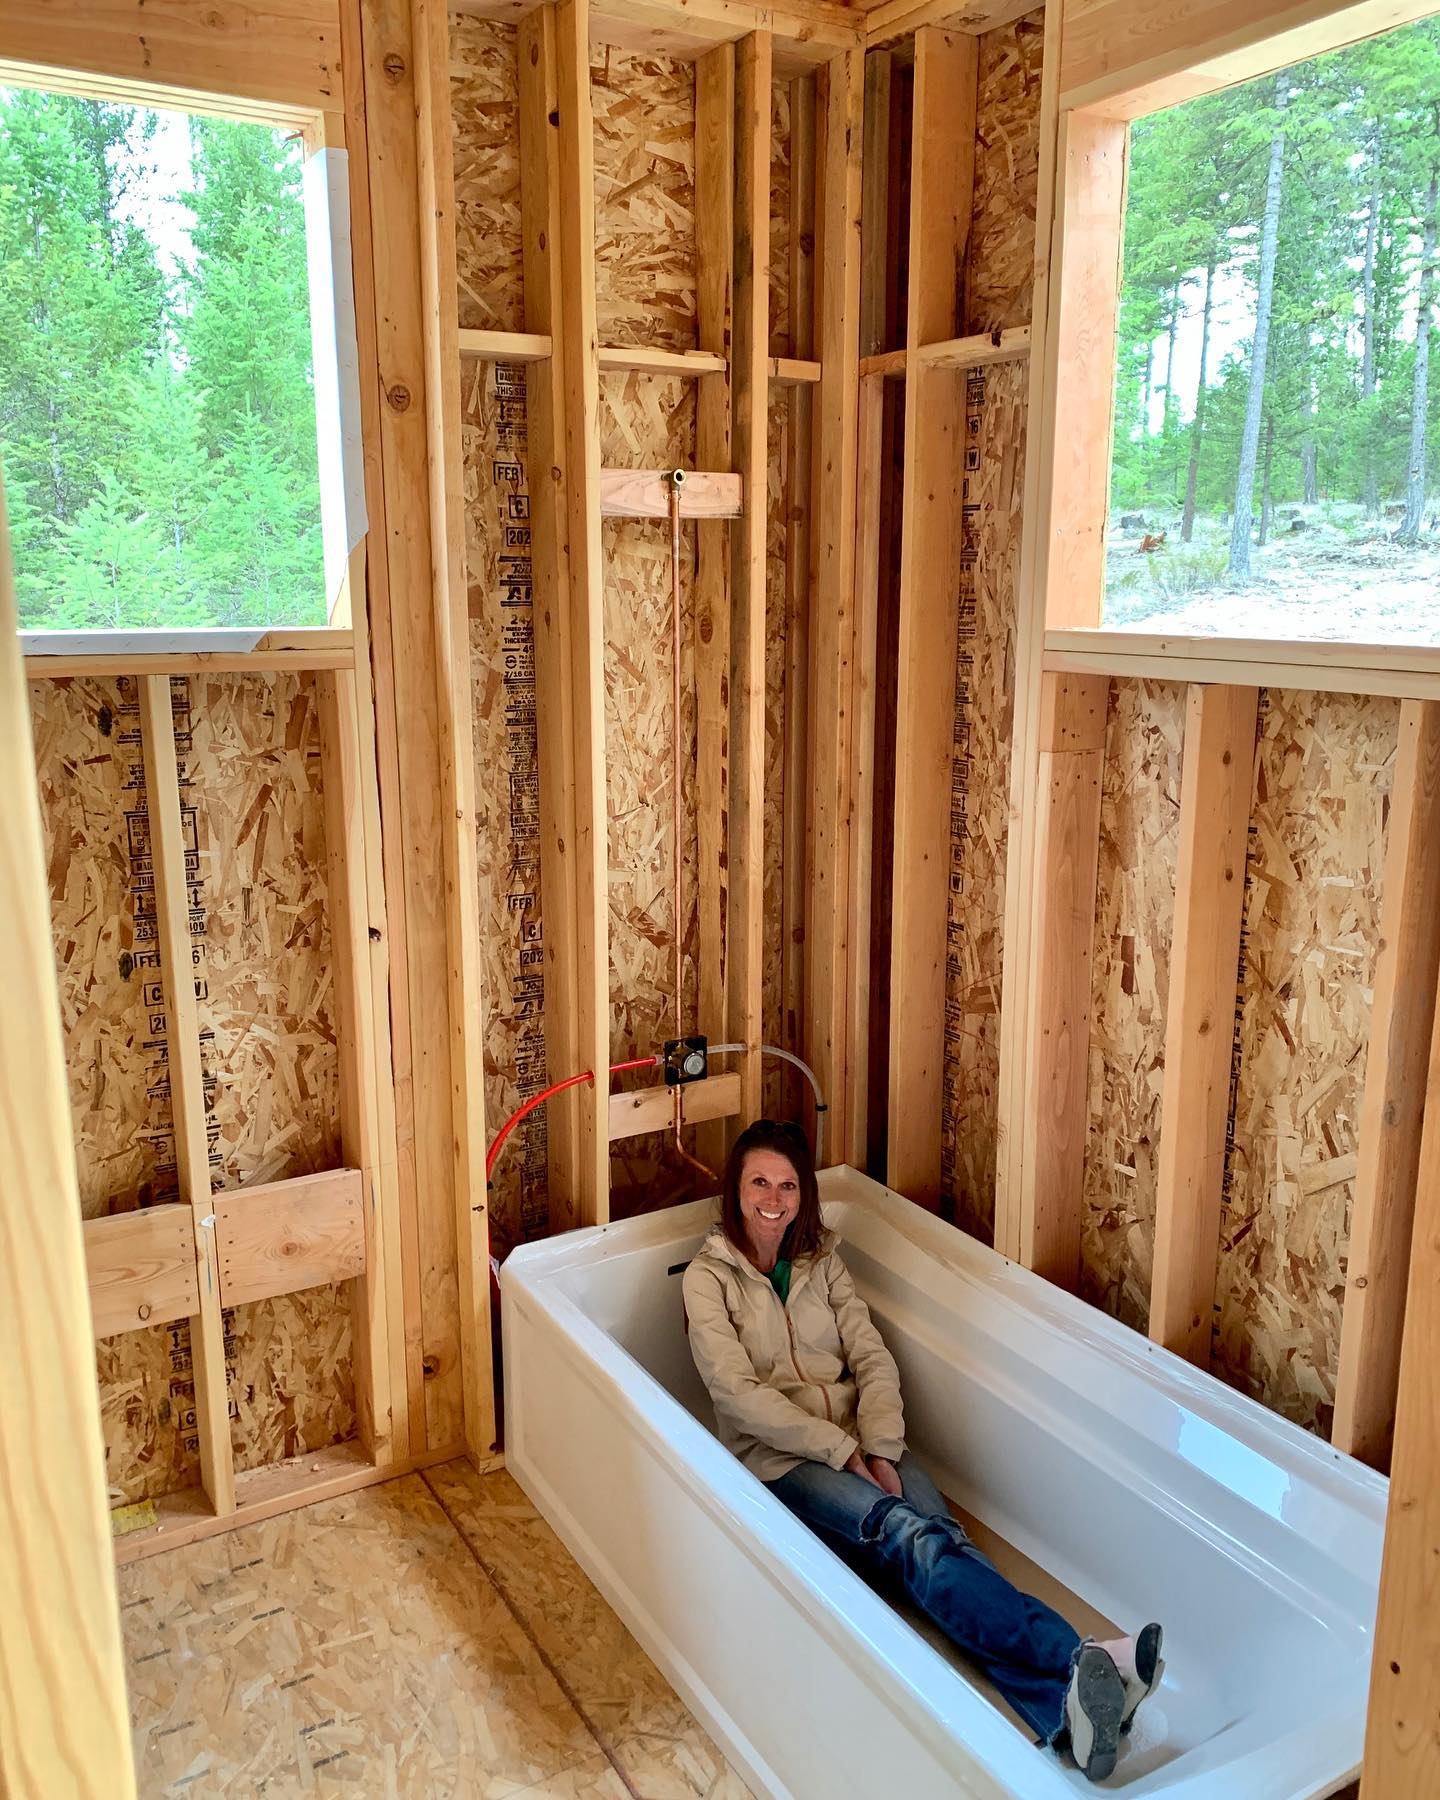 It’s a little bigger than a “Somer-sized” tub  # whitefish custom home builder